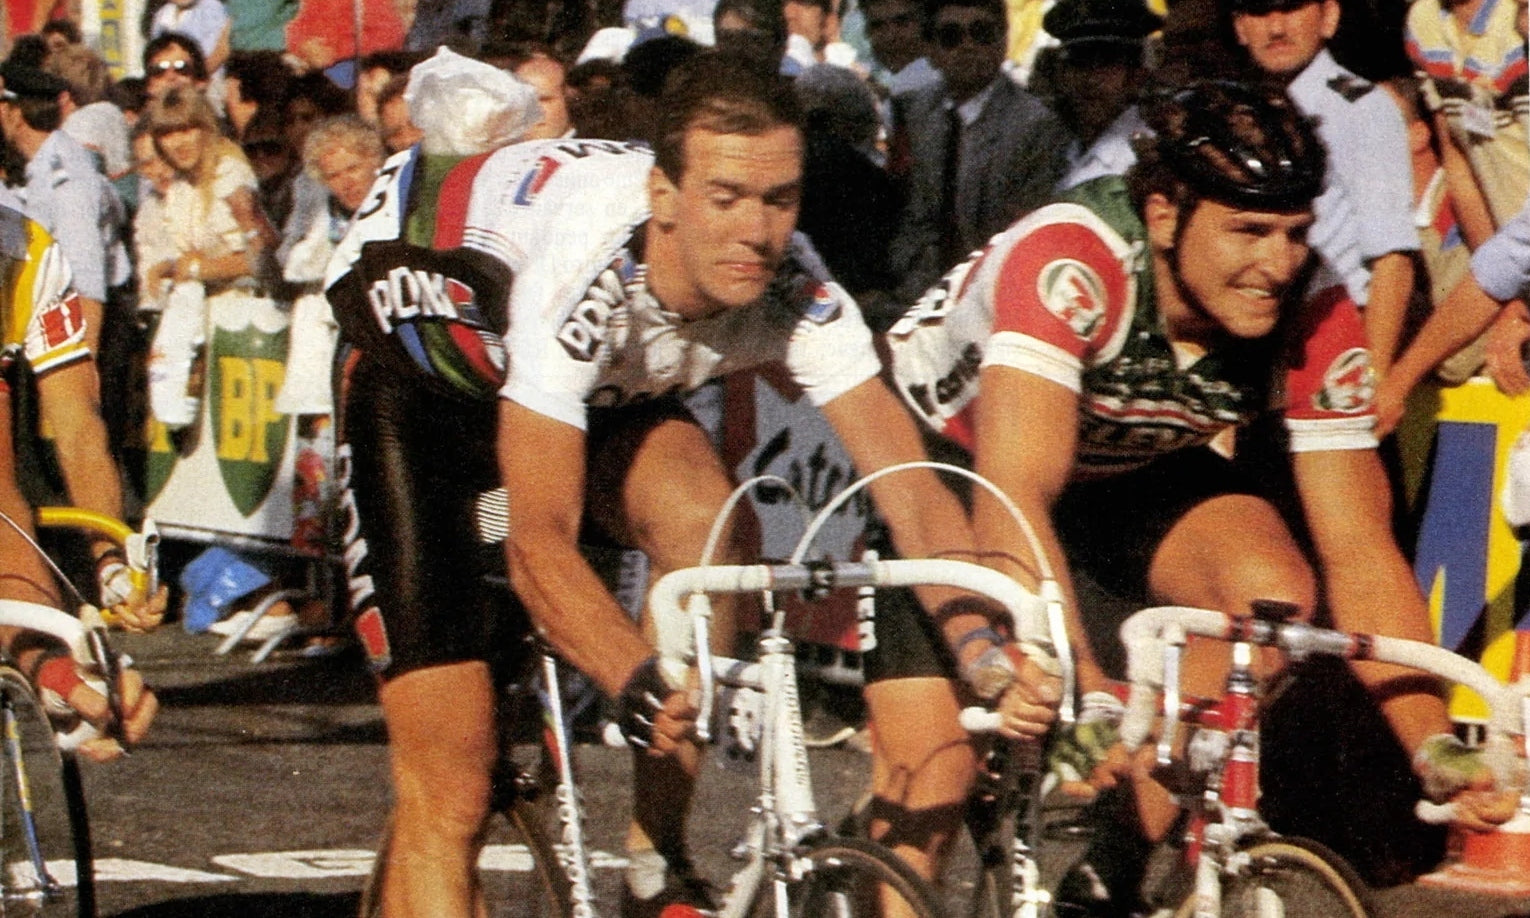 Phinney wins stage 3 1986 Tour